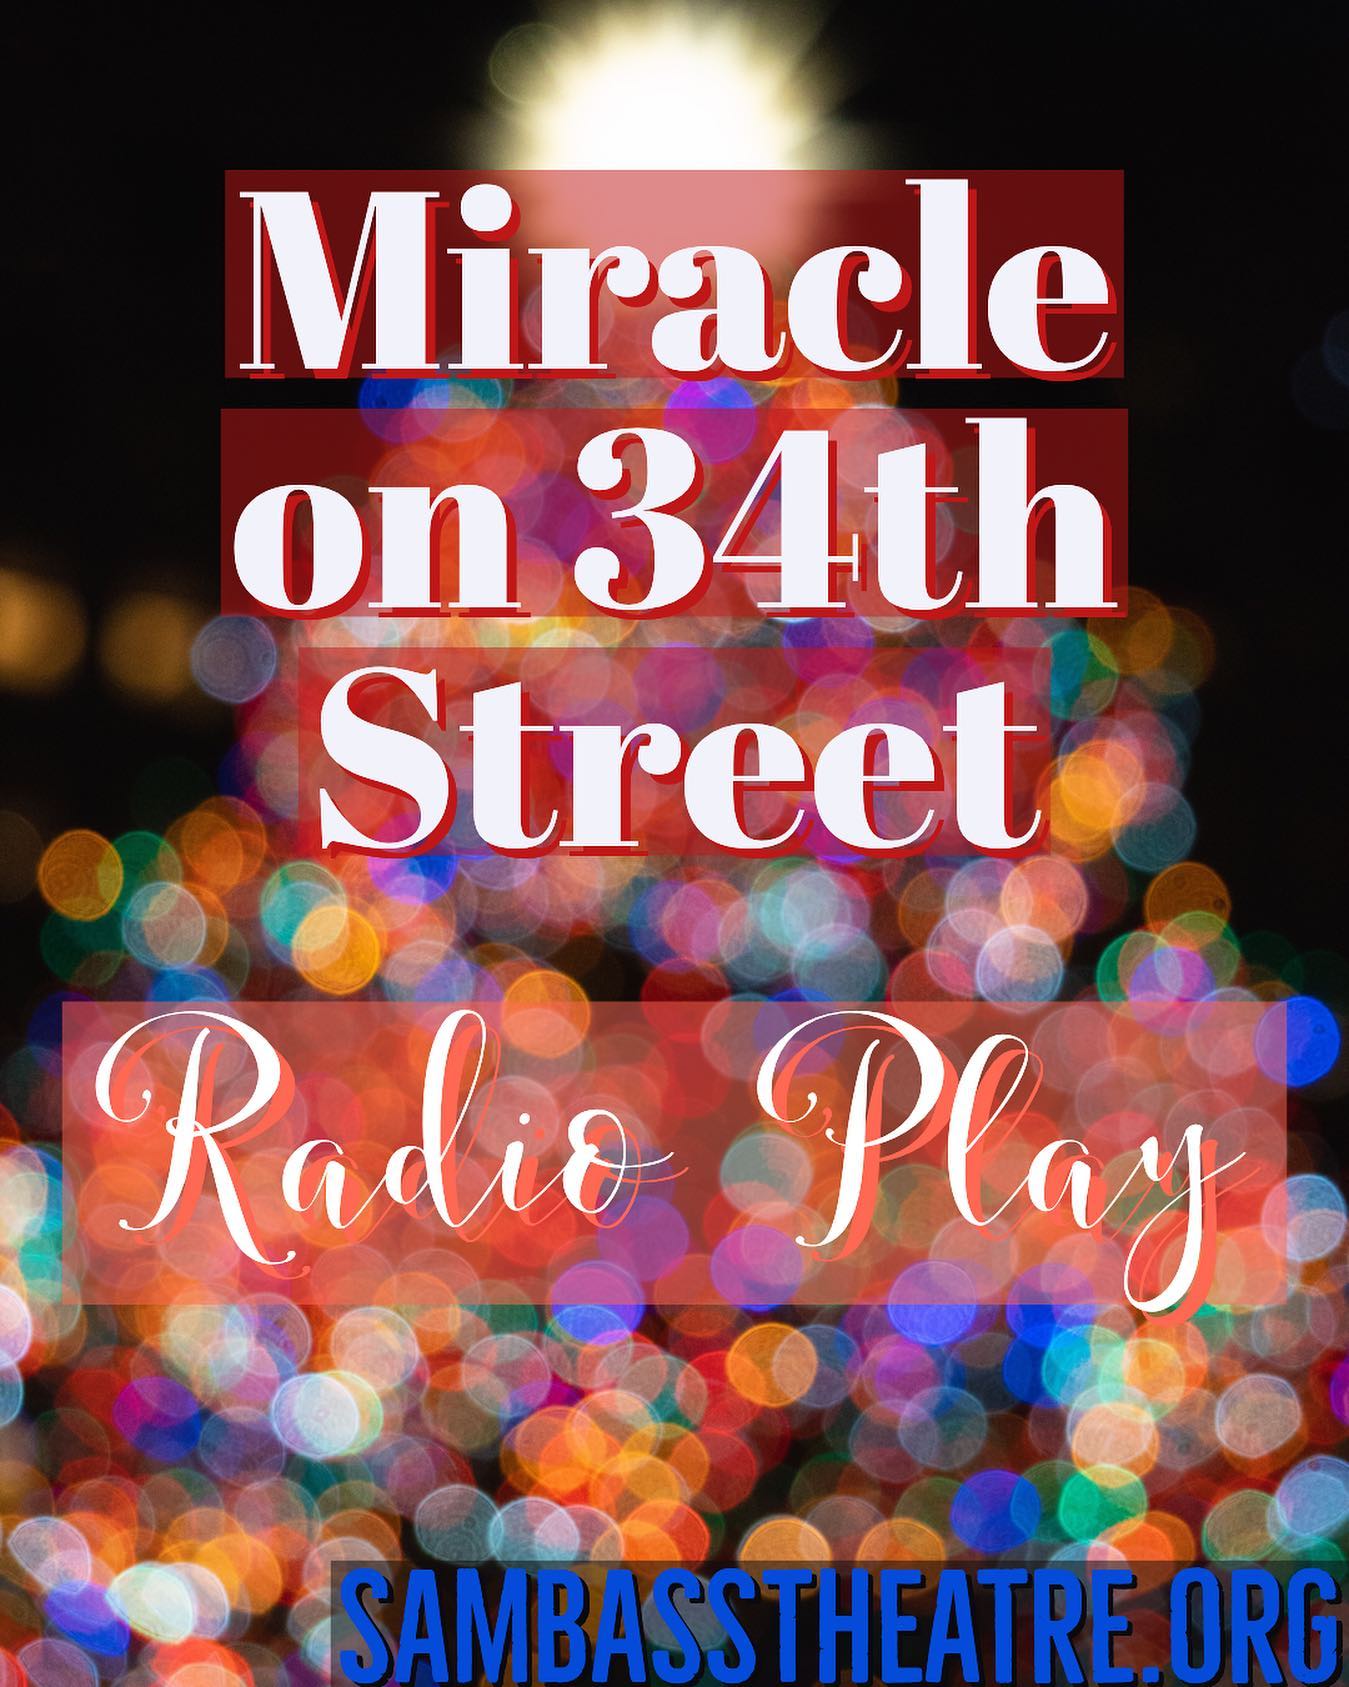 Miracle on 34th Street by Sam Bass Theatre Association